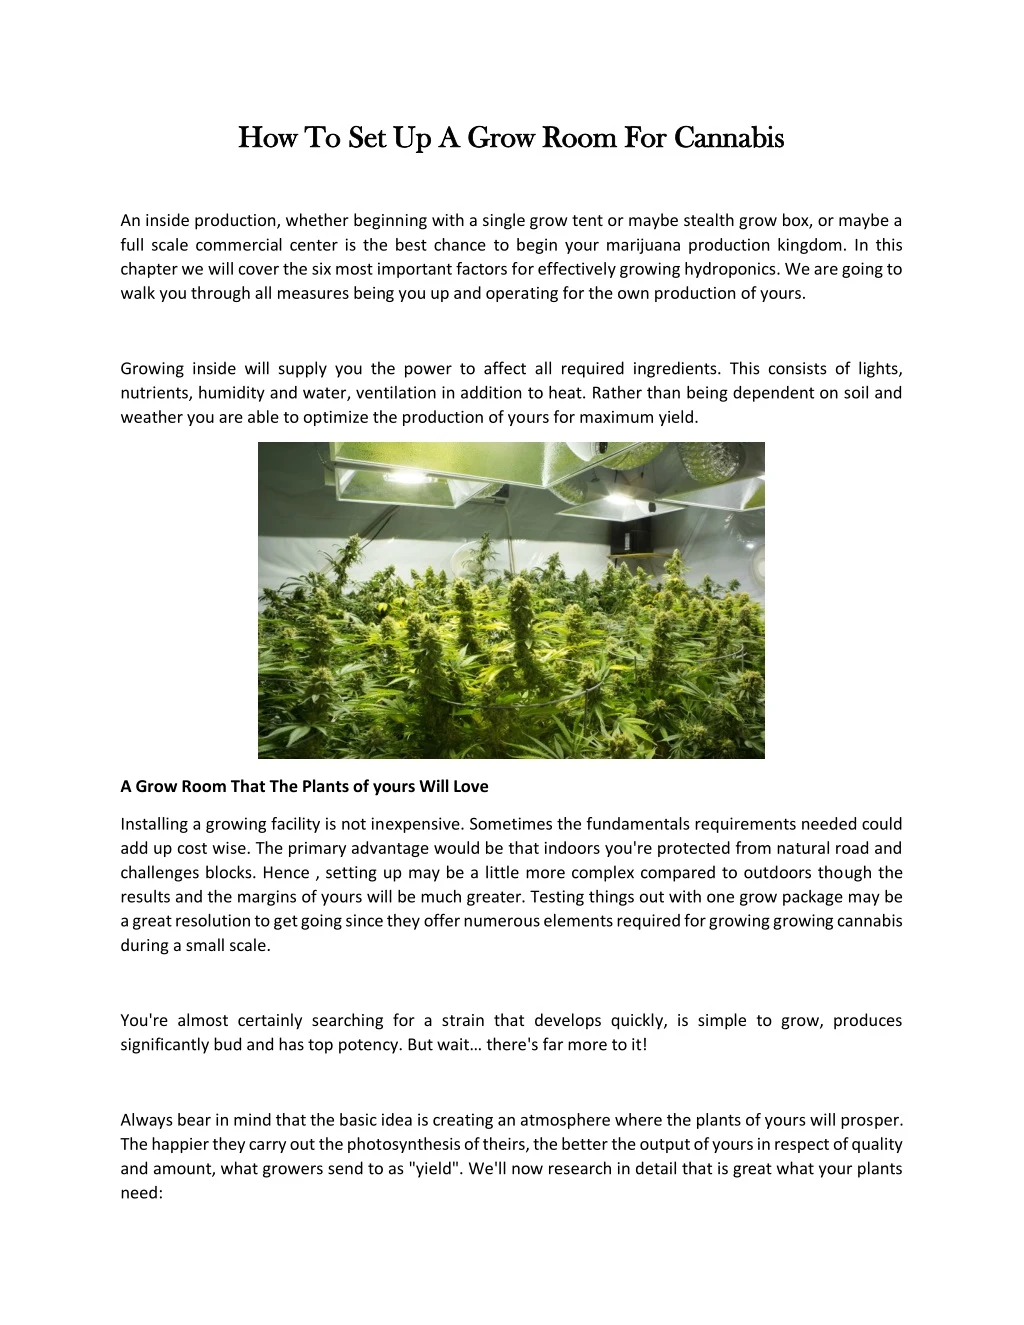 how to set up a grow room for cannabis